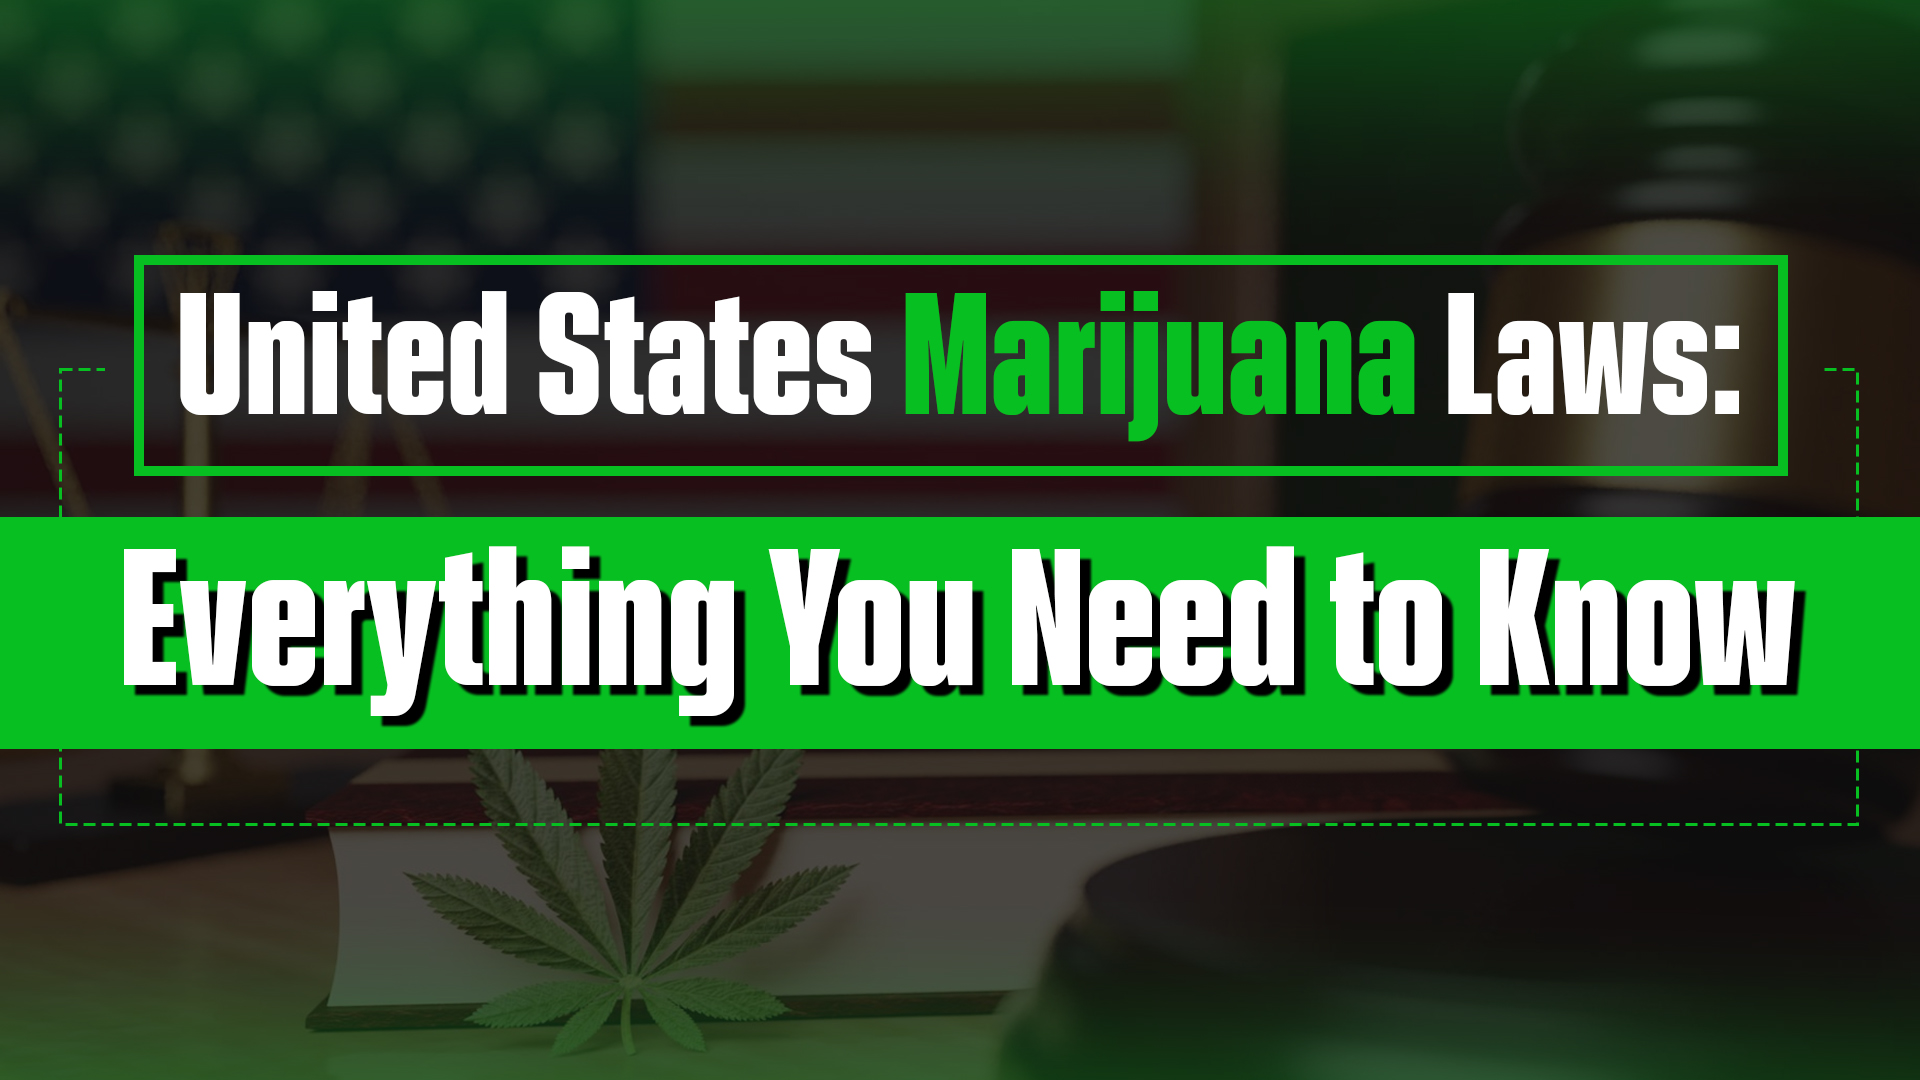 United States Marijuana Laws: Everything You Need to Know